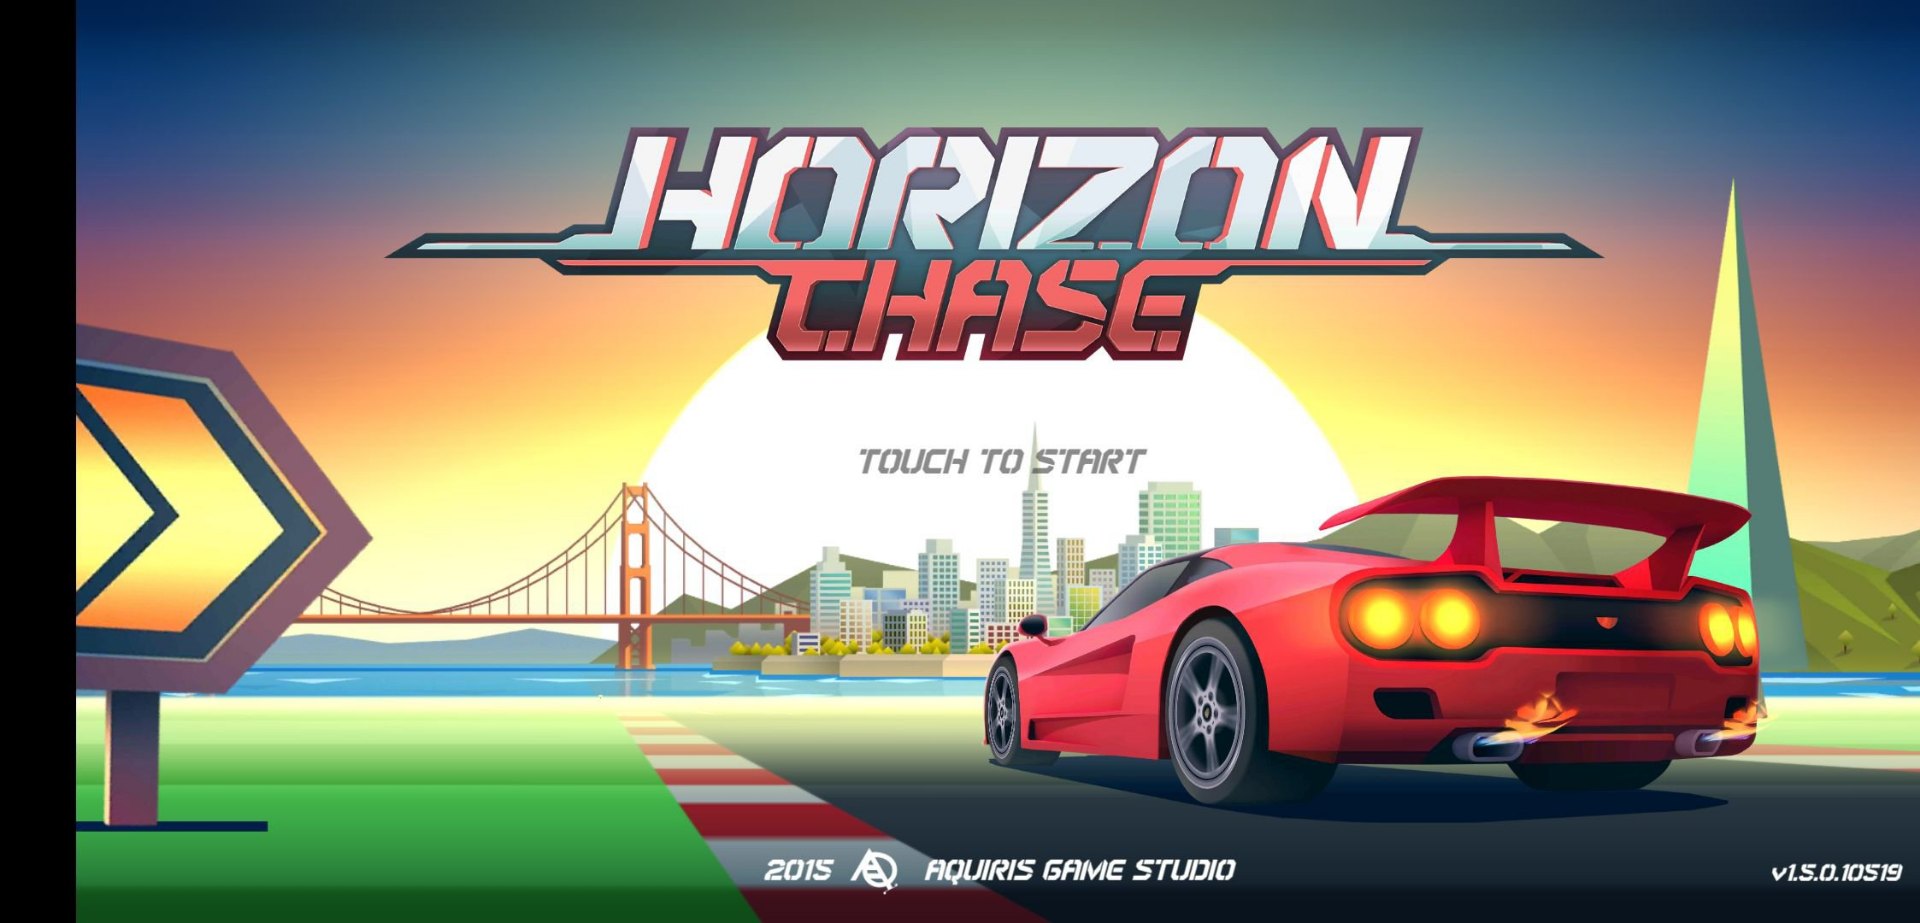 Horizon Chase - How to Get Coins